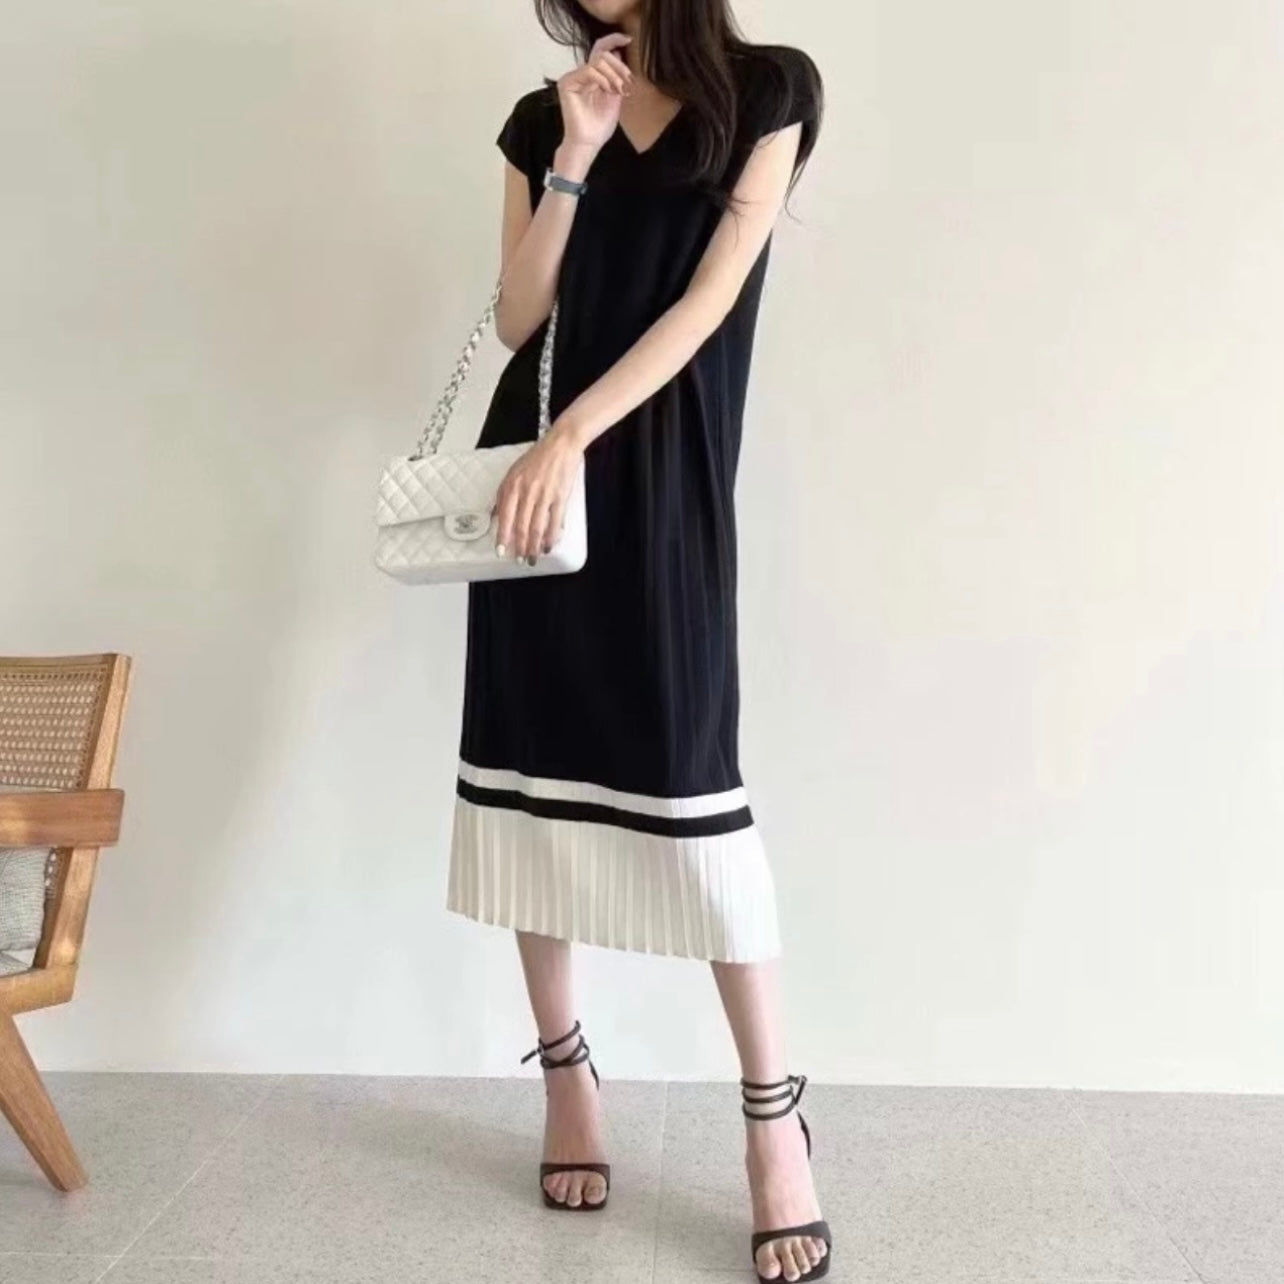 Two Tone V-neck Pleated Bottom Oversize Knitted Dress